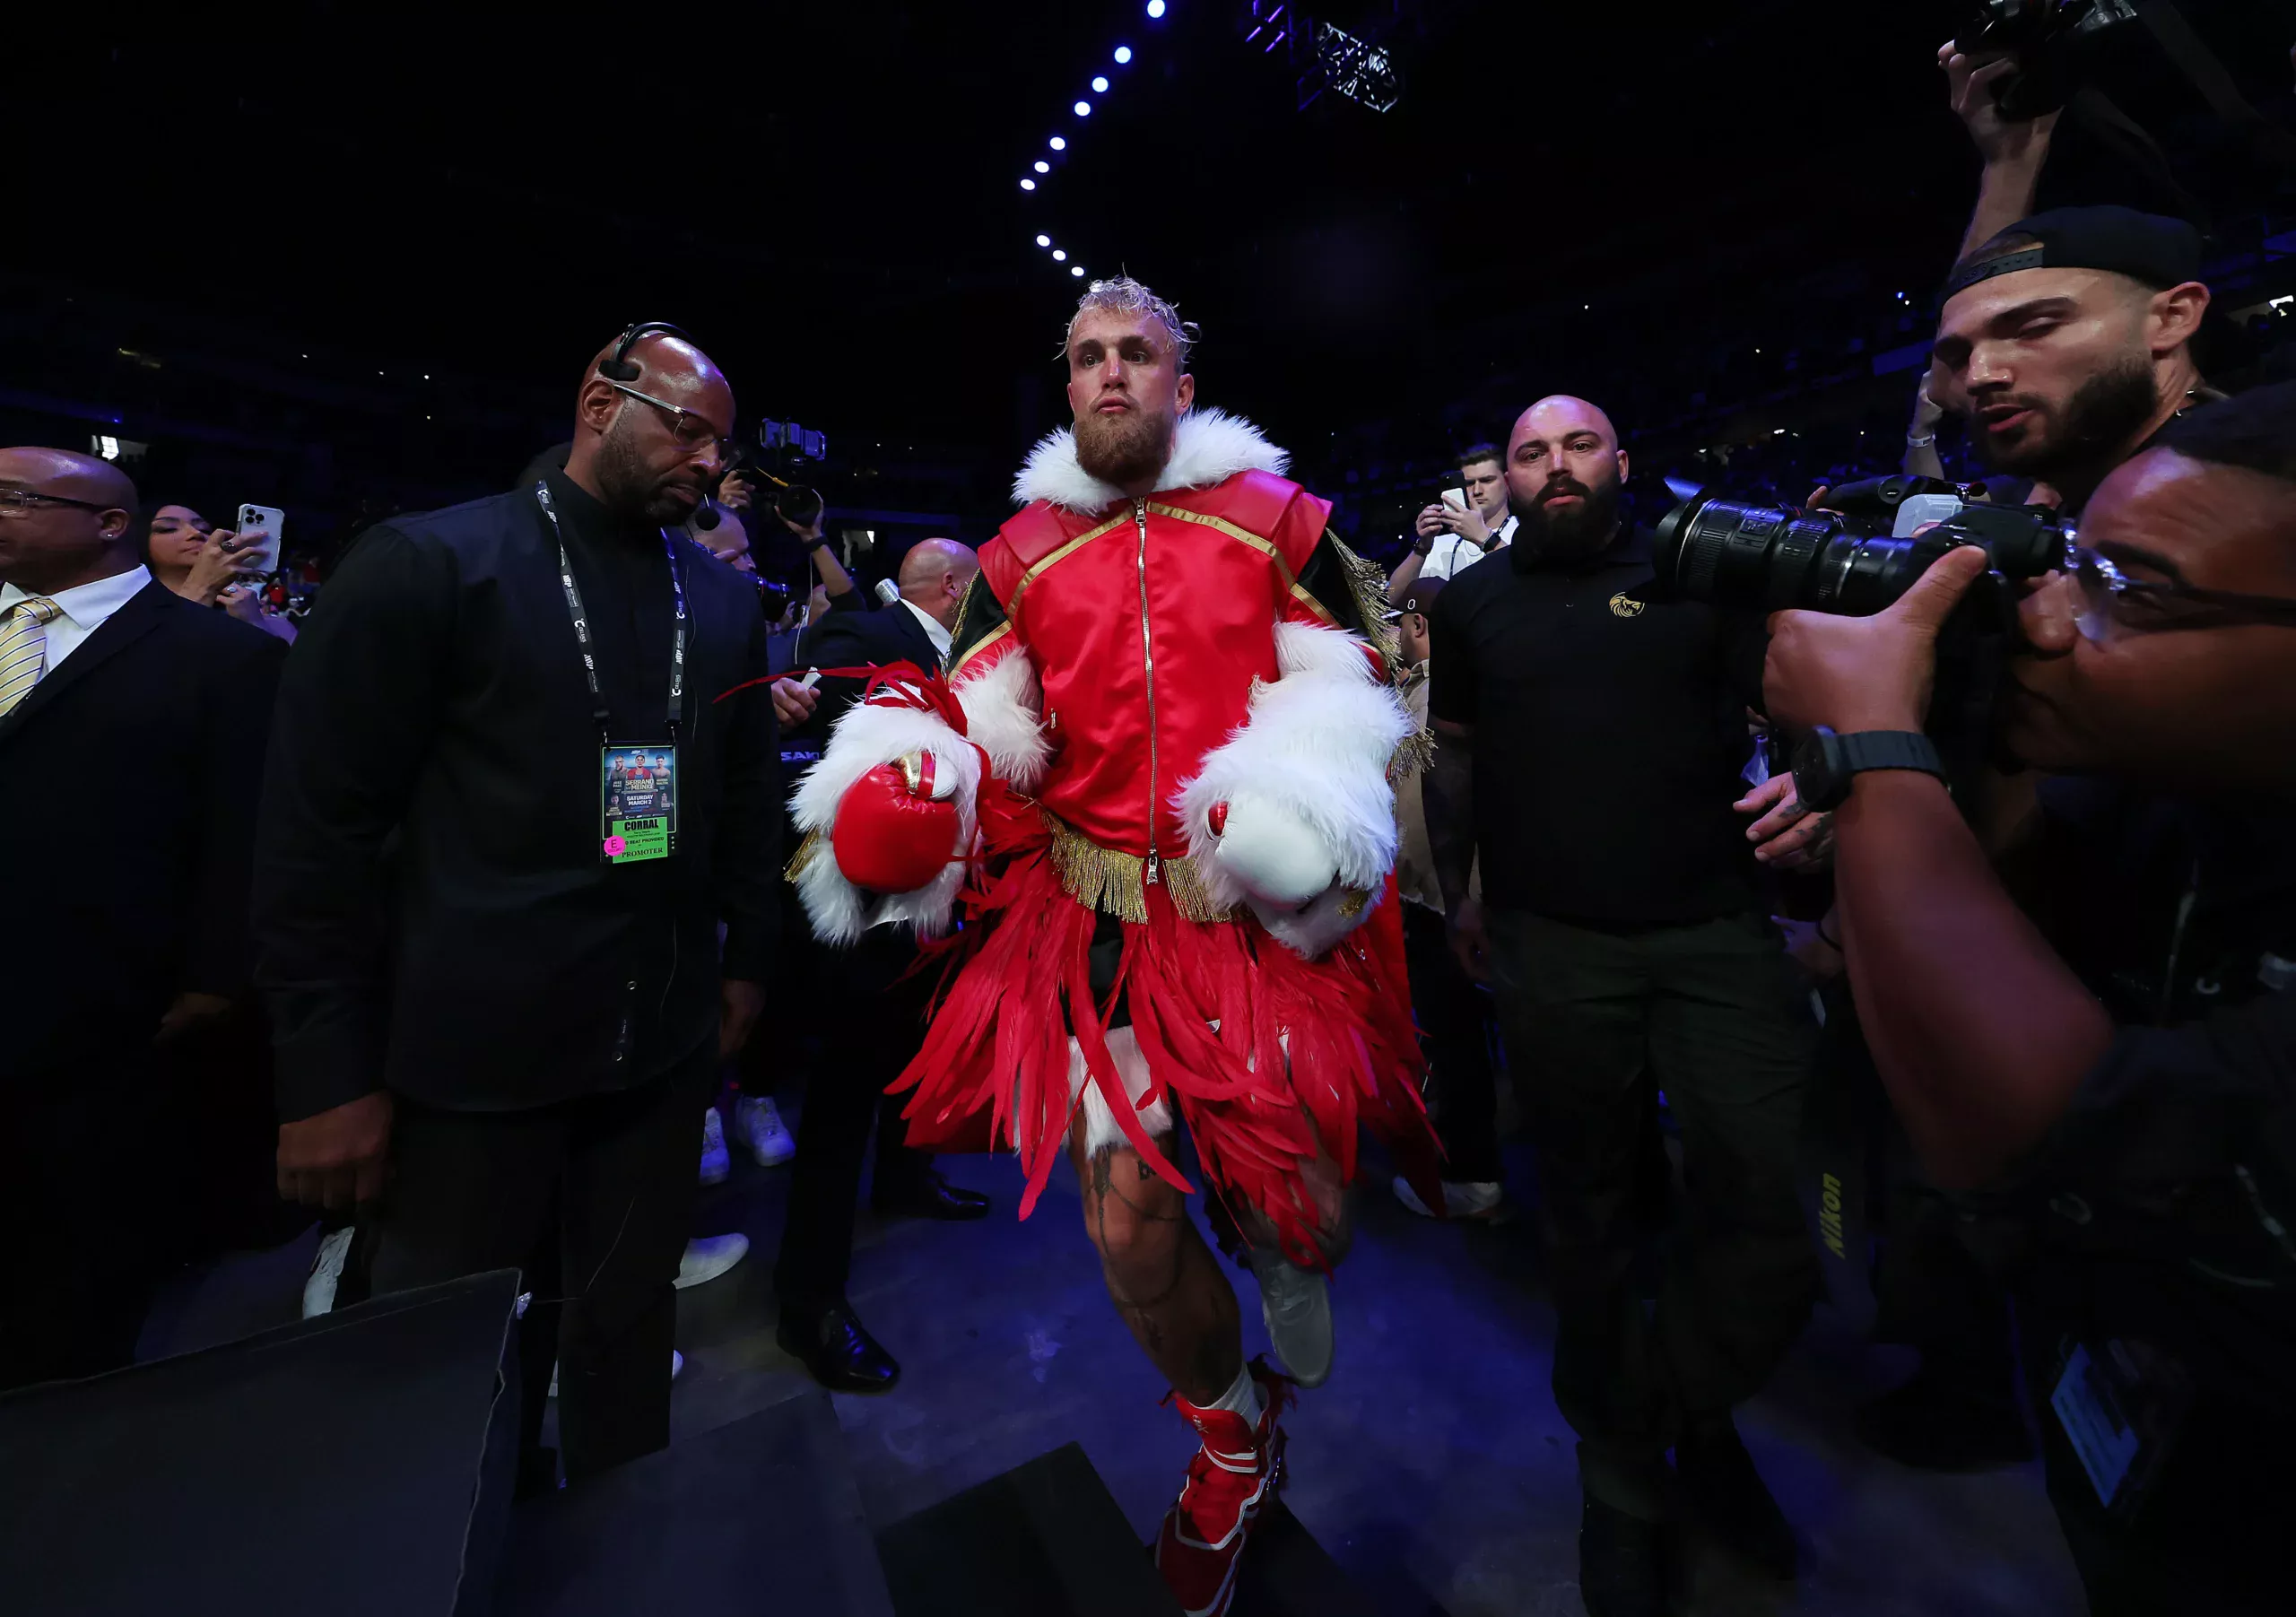 “You would have no chance”: Boxing fans express discontent with Jake Paul’s desire to fight in MMA after Mike Tyson bout